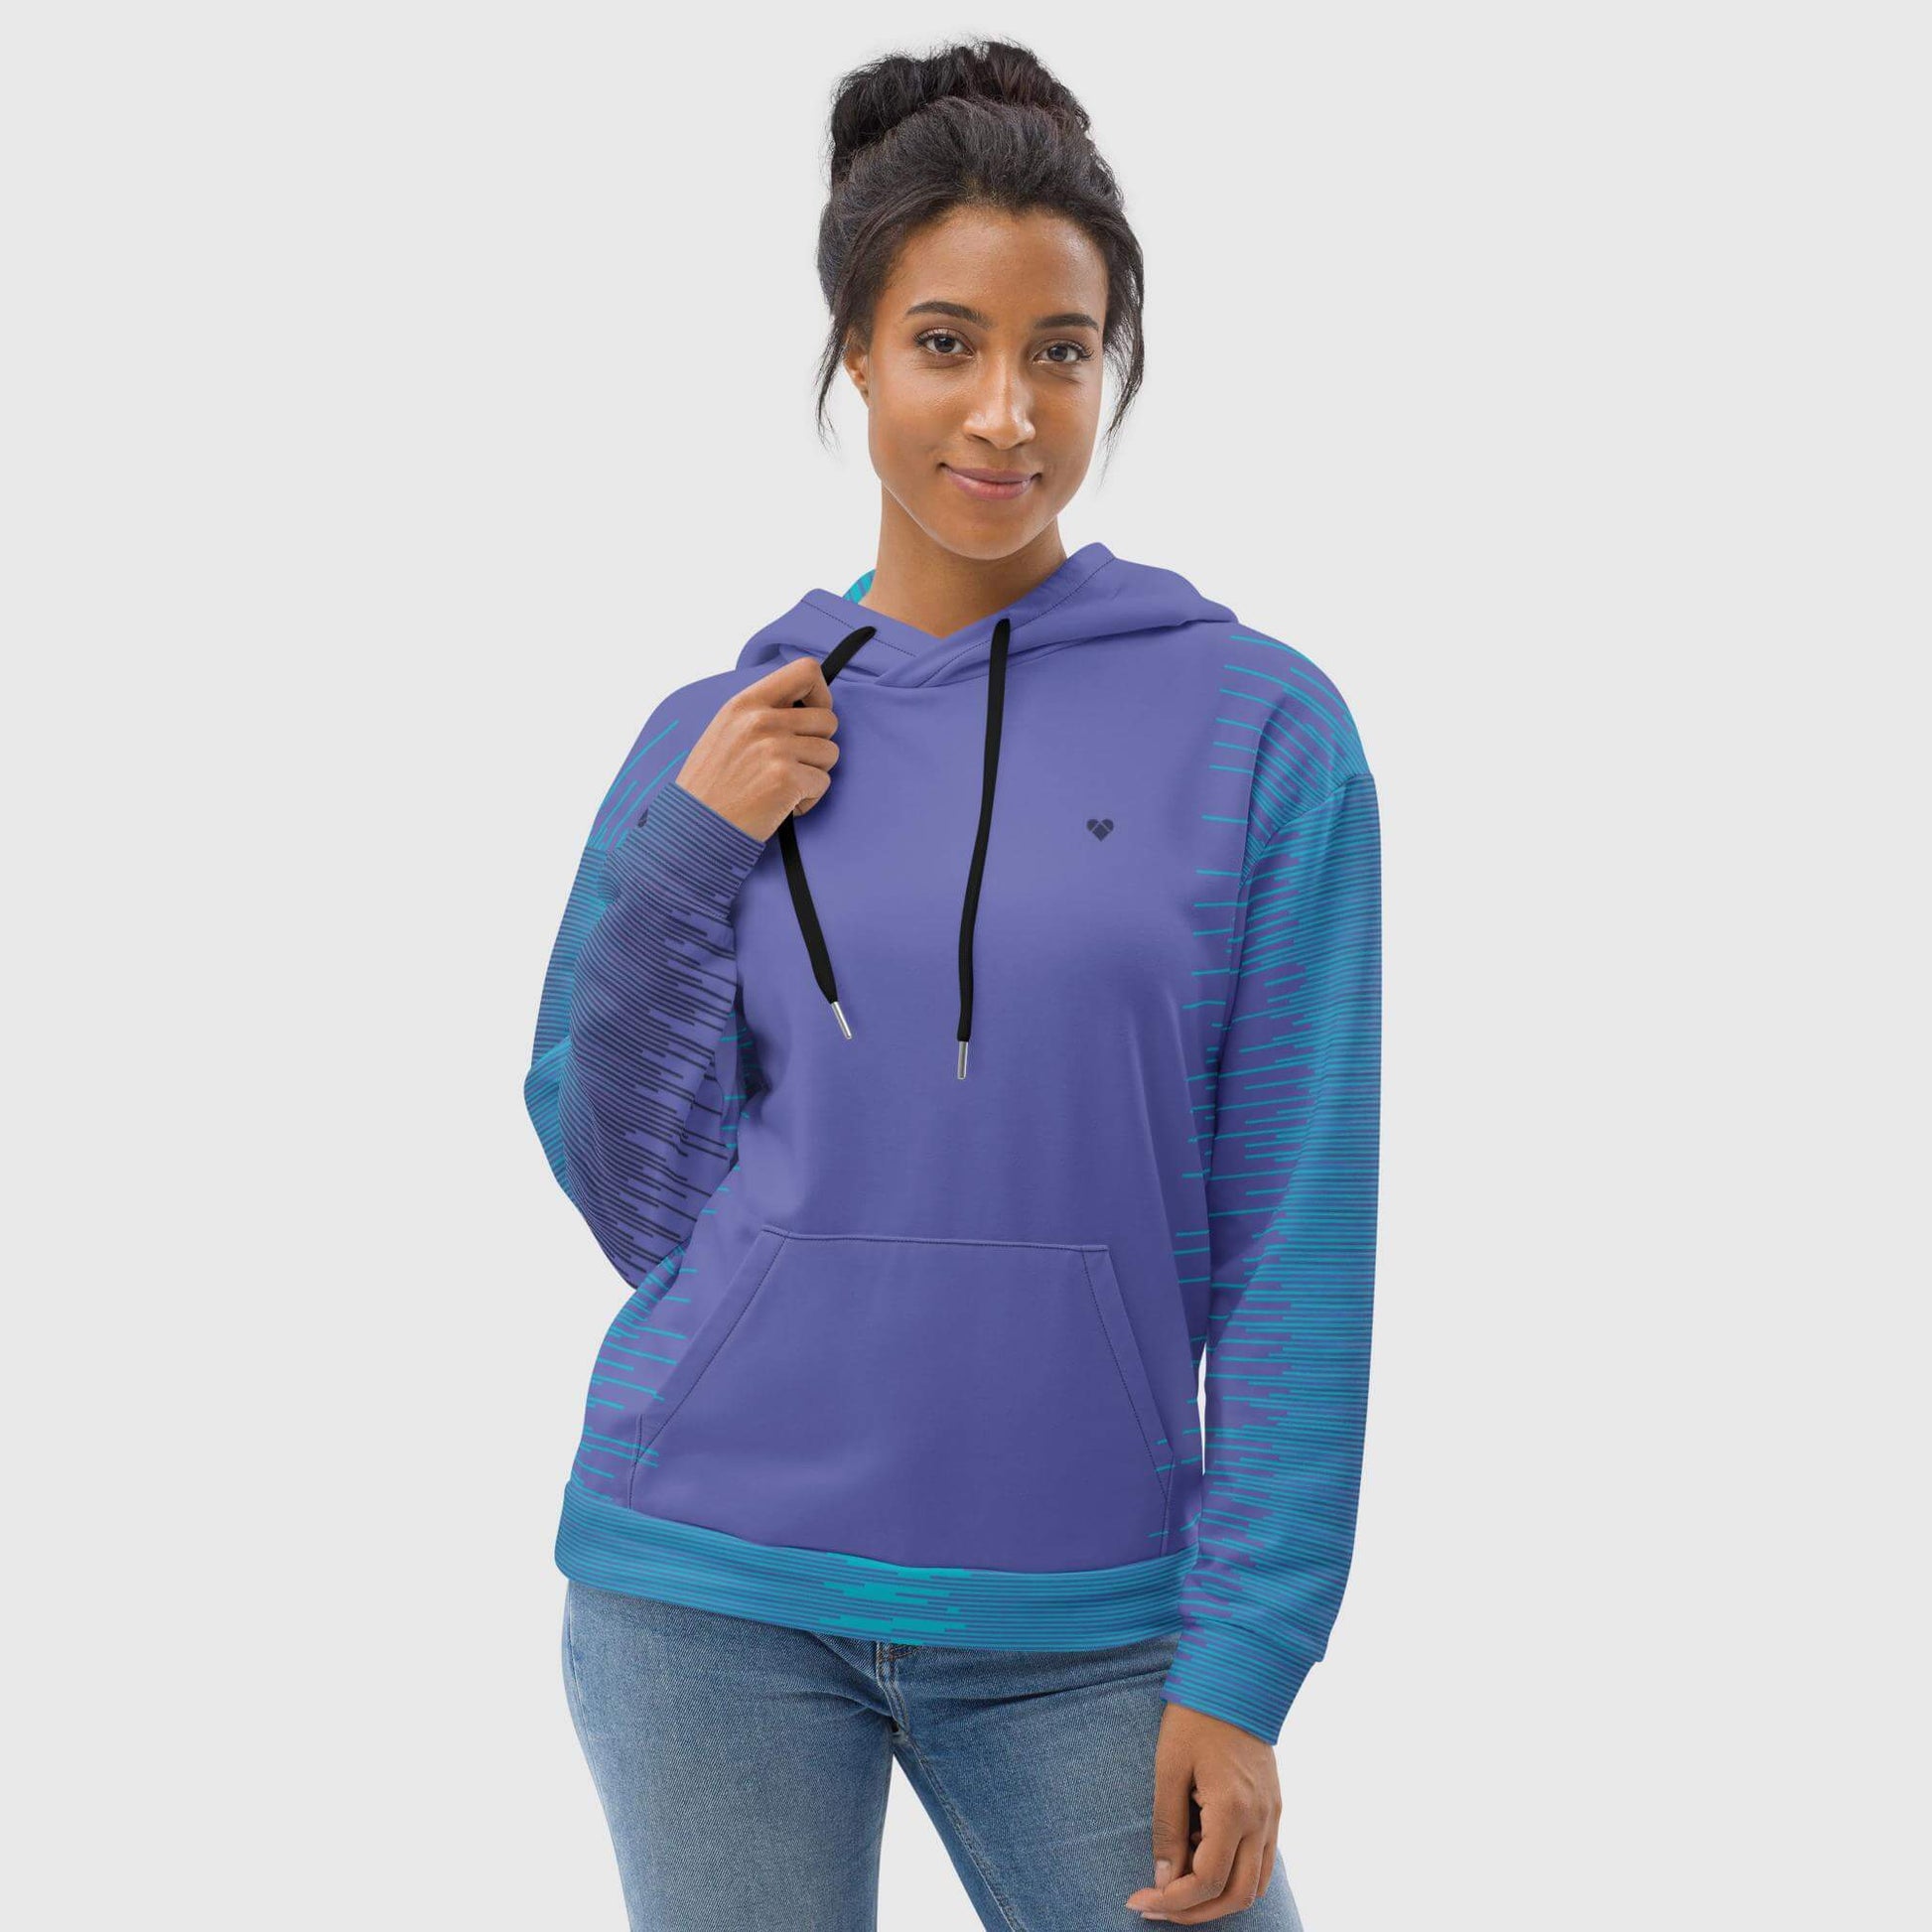 Fashion-forward sporty hoodie with gradient lines